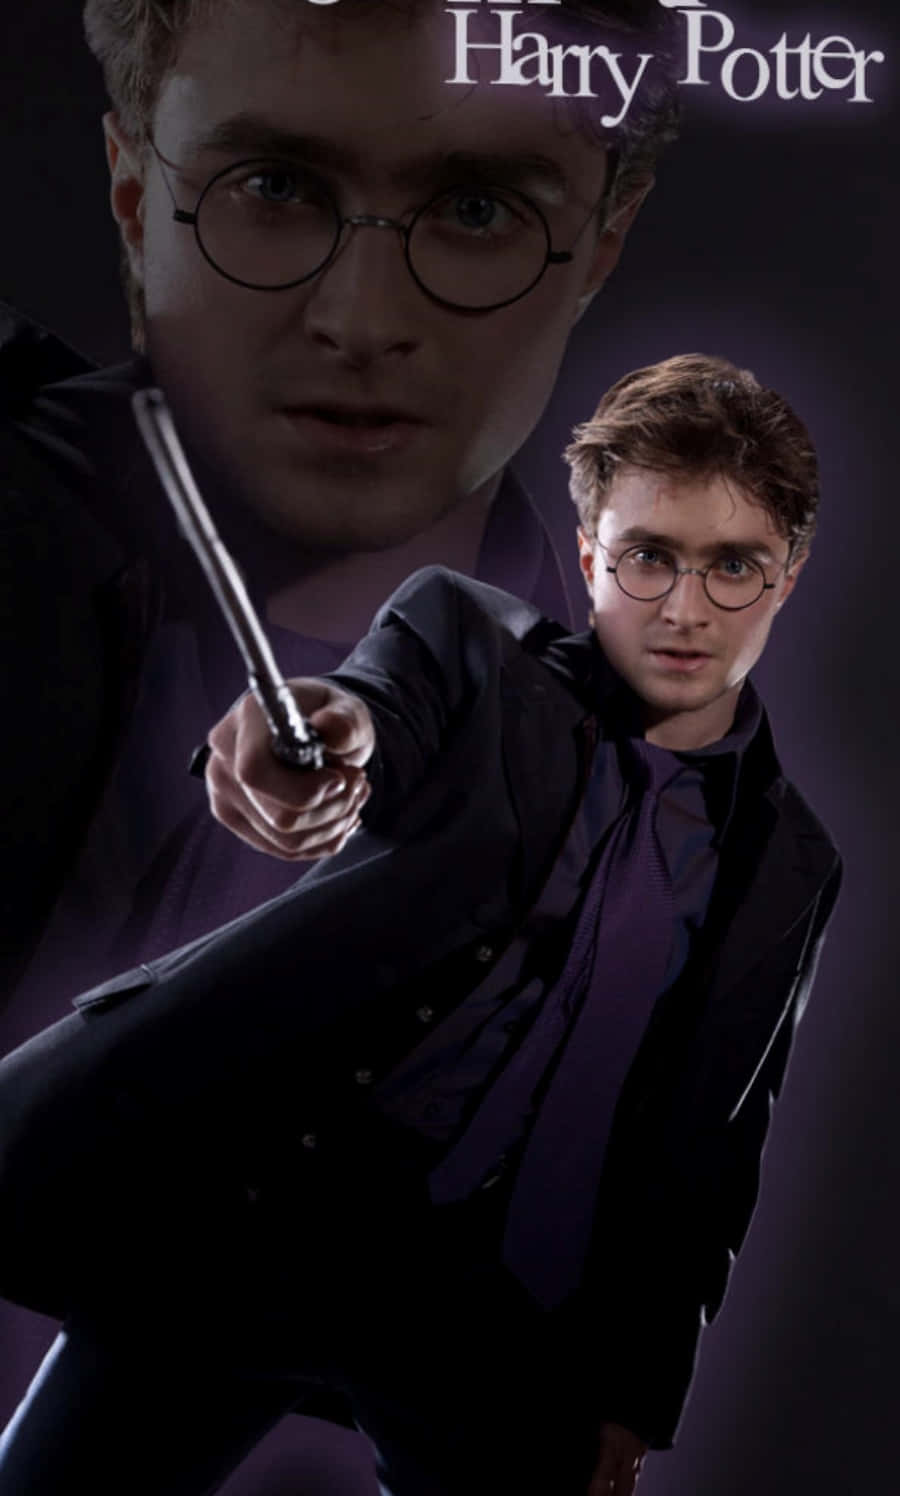 A close-up look at Harry Potter from the famous book and movie series